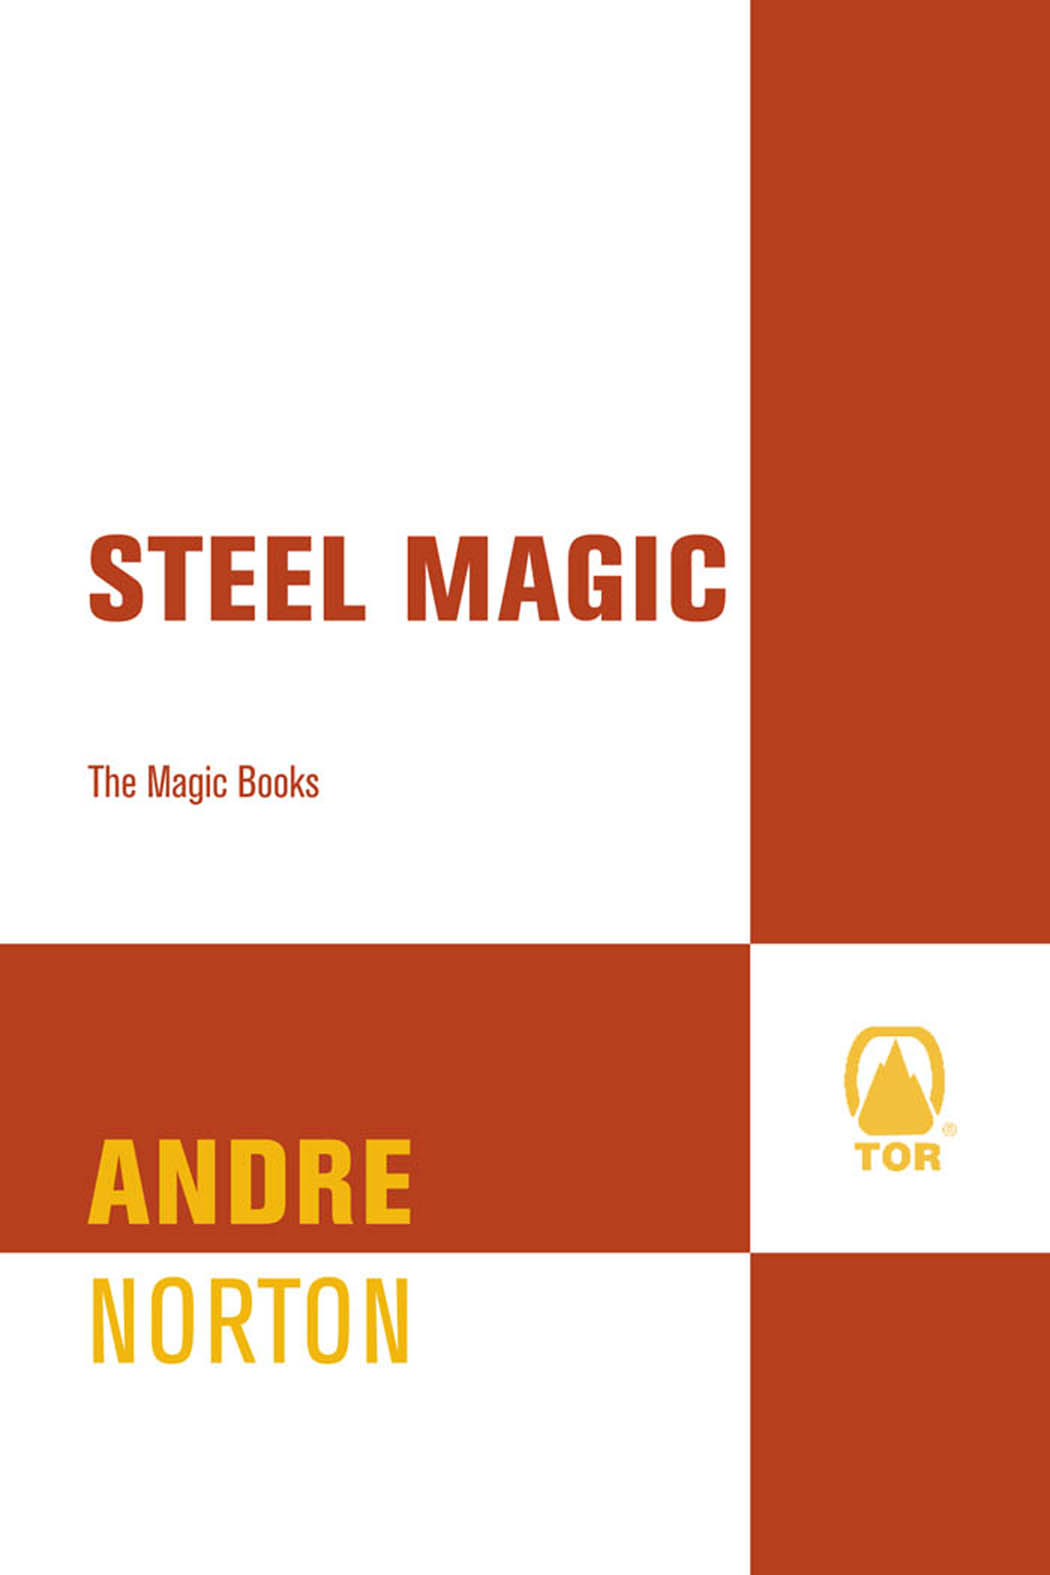 Steel Magic (1965) by Andre Norton